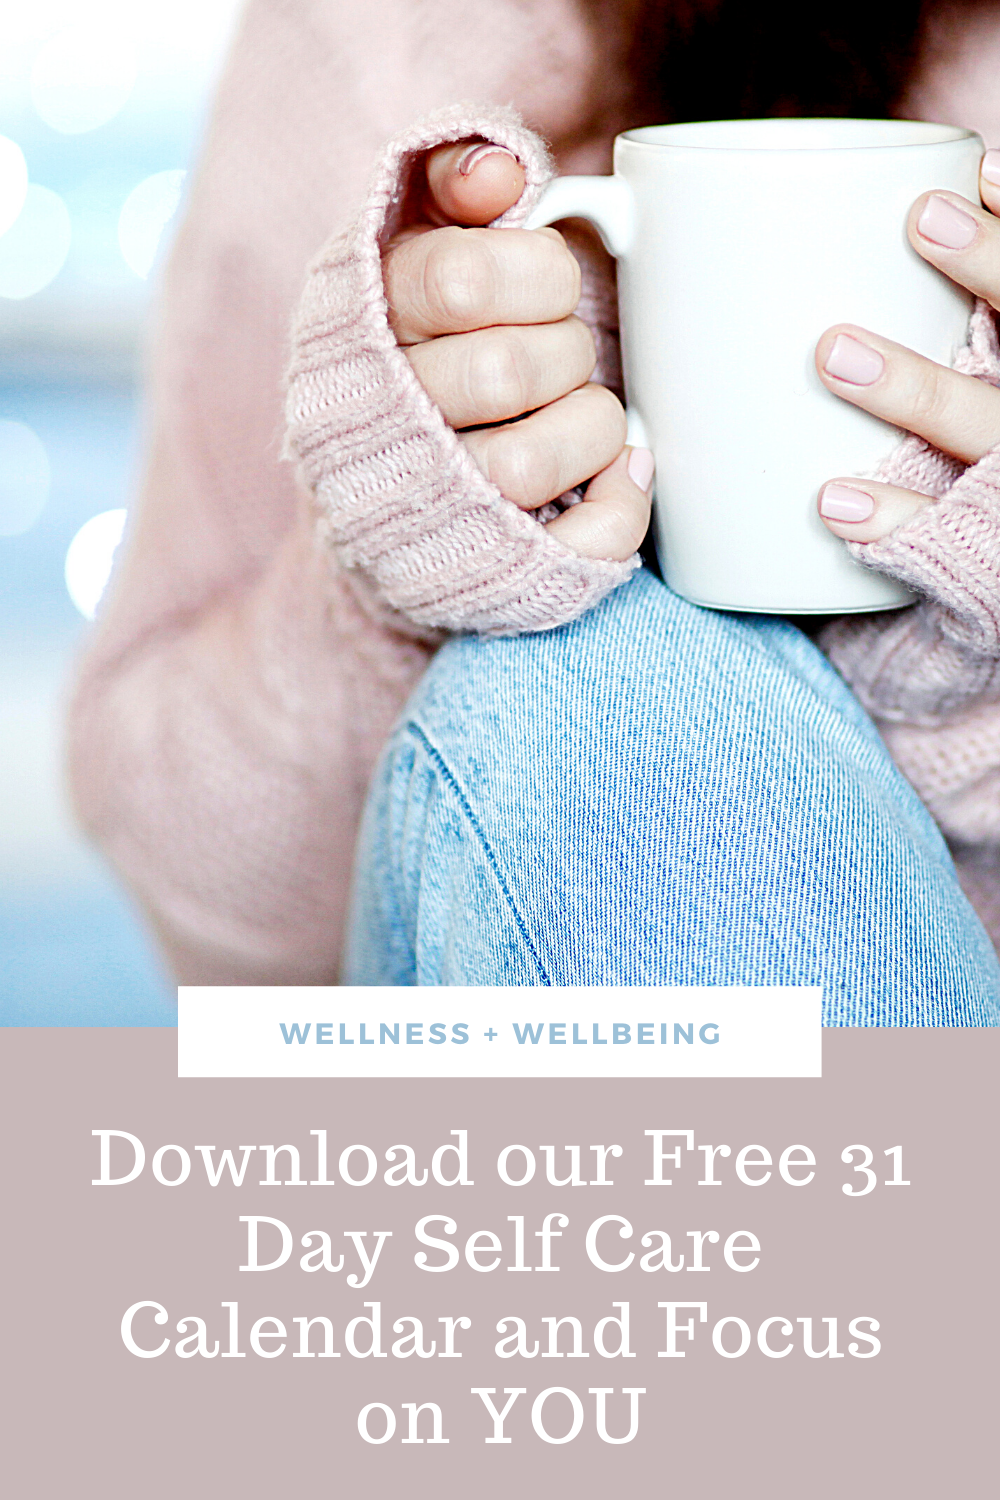 It's time to focus on YOU for a change with this free 31 day self care challenge. Don't forget to get the motivational wallpapers for your phone to keep you on track! #wellness #selfcare